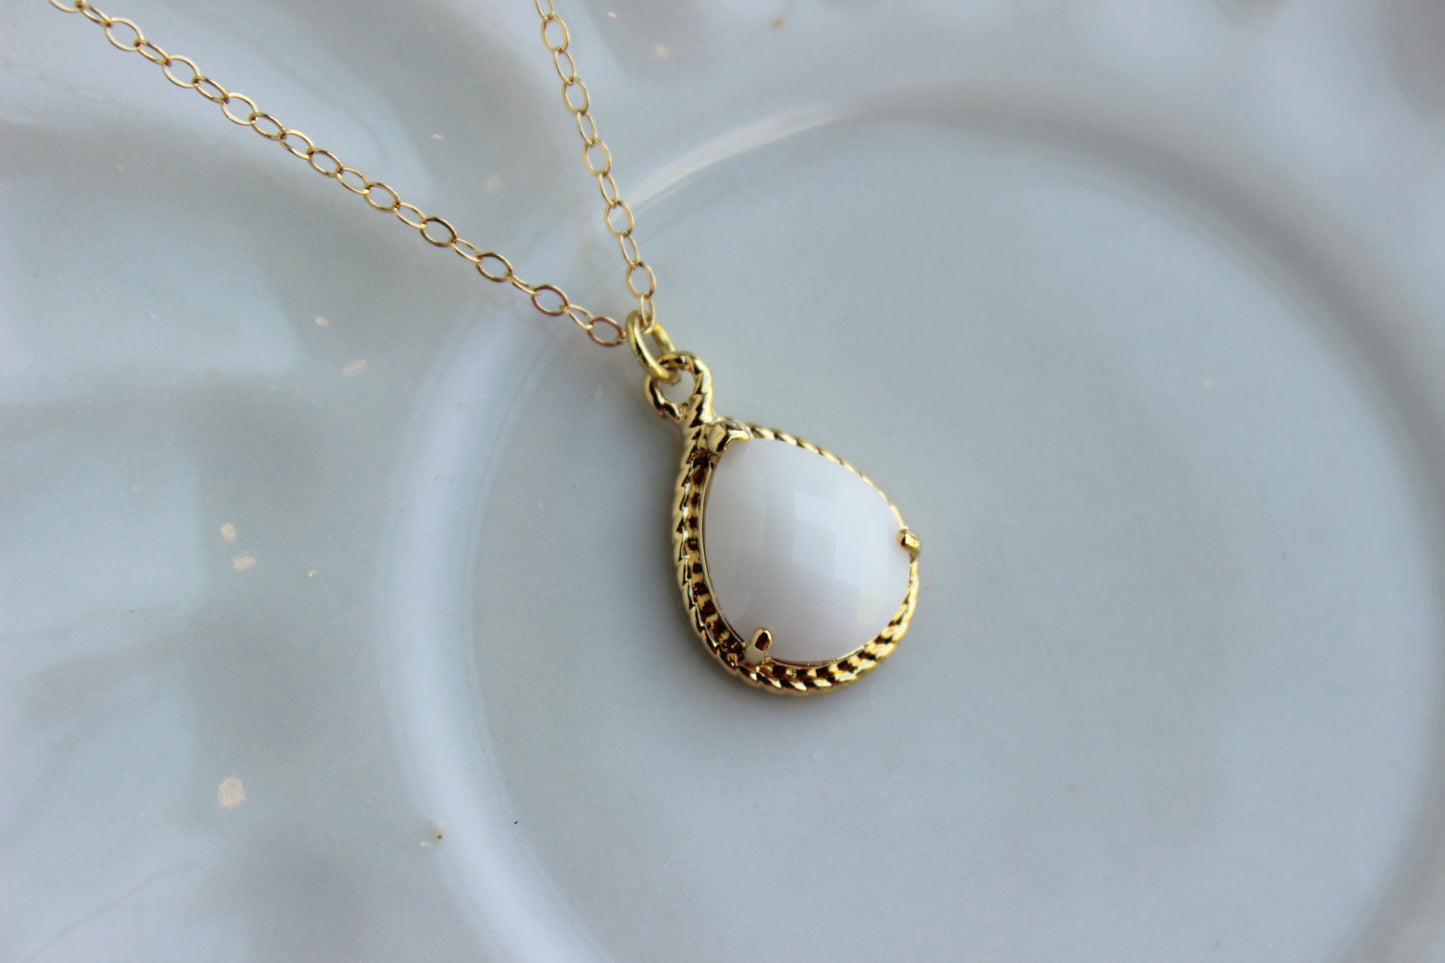 Gold White Opal Necklace - Cream Milk White Wedding Necklace Jewelry Bridesmaid Gift Jewelry - White Opal Bridal Jewelry - Gift Under 30